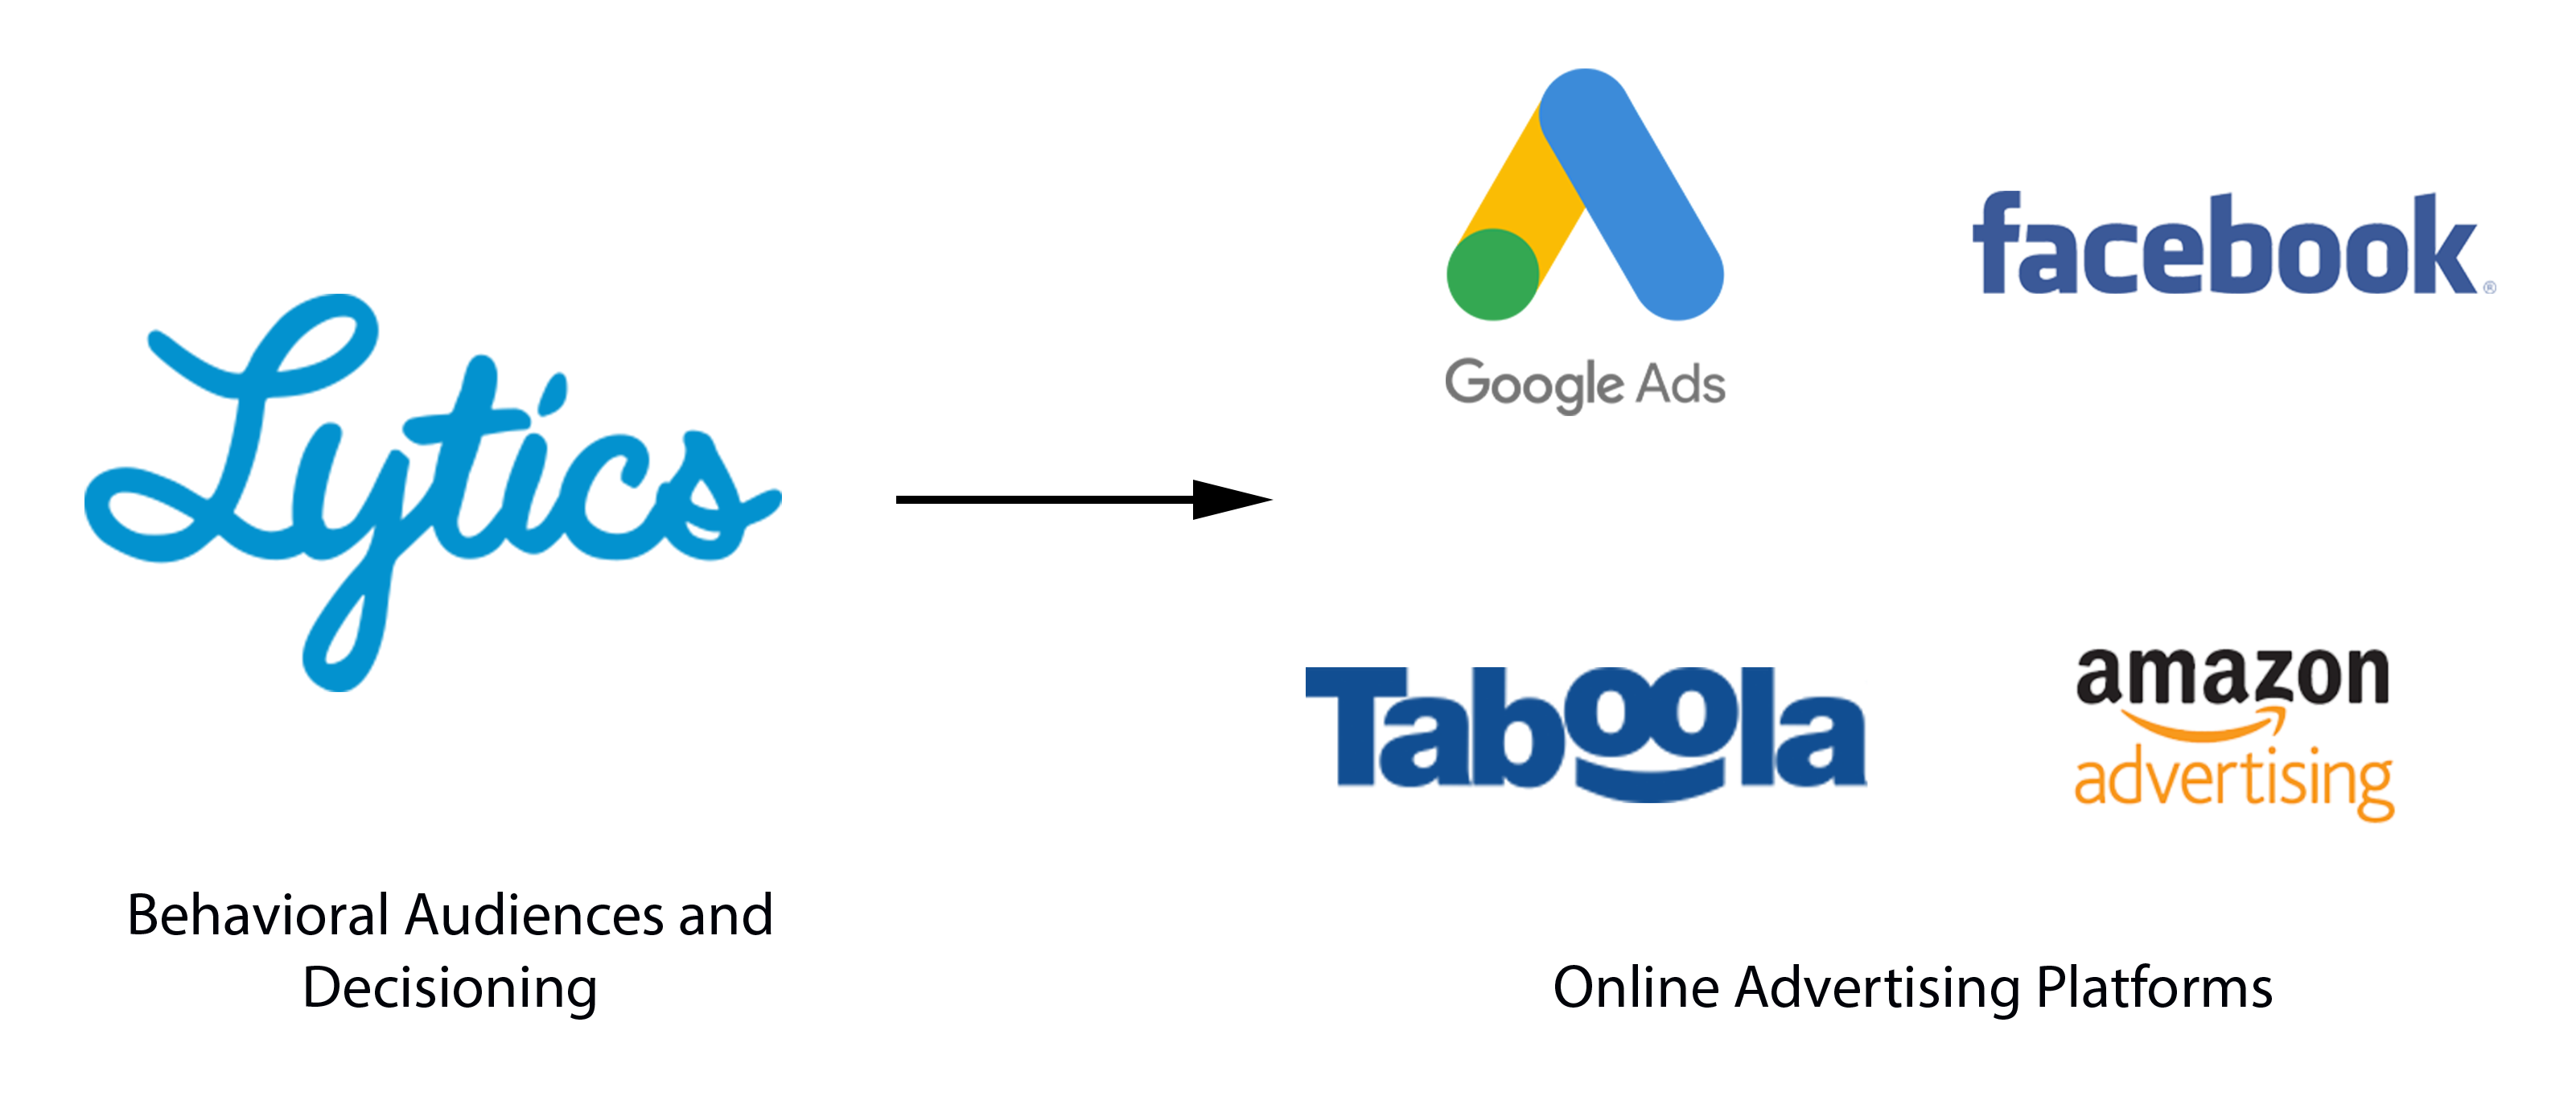 new-connections-to-google-ads-taboola